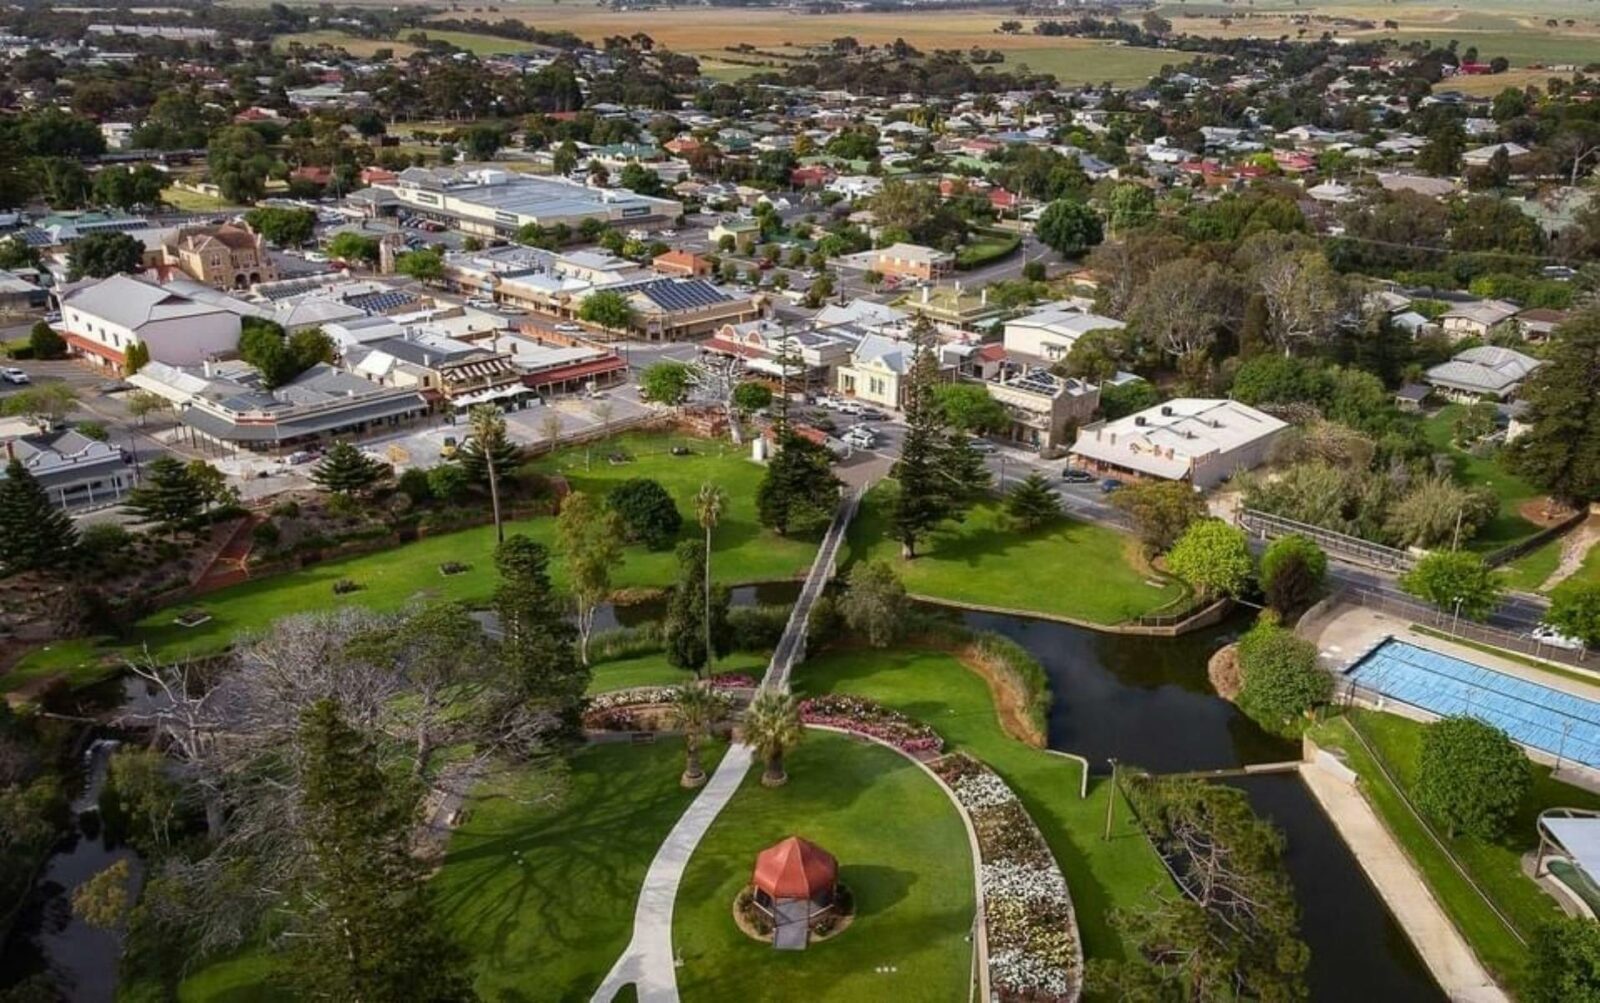 View of the town of Strathalbyn from above